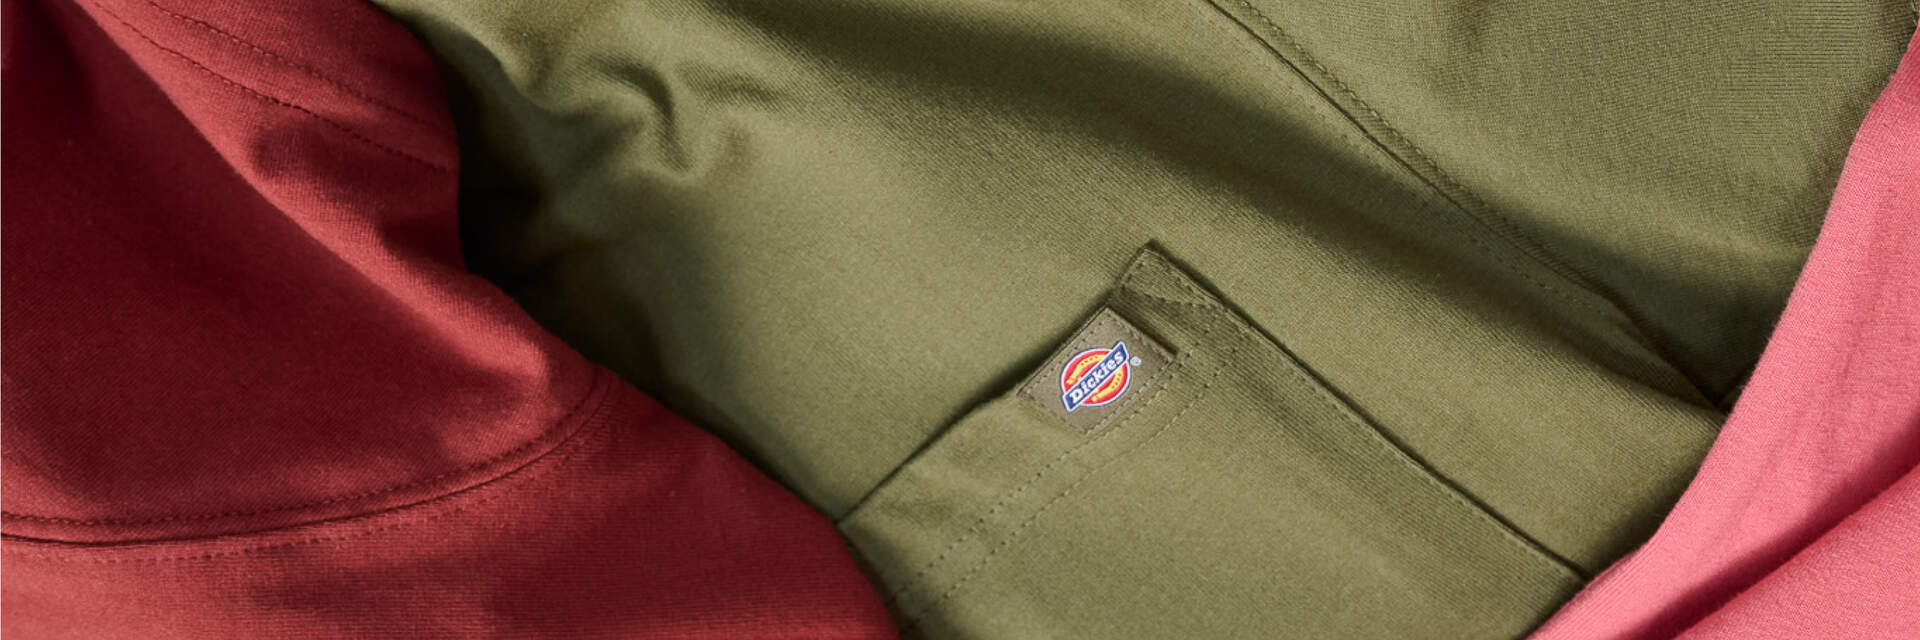 close up of folded Dickies clothes